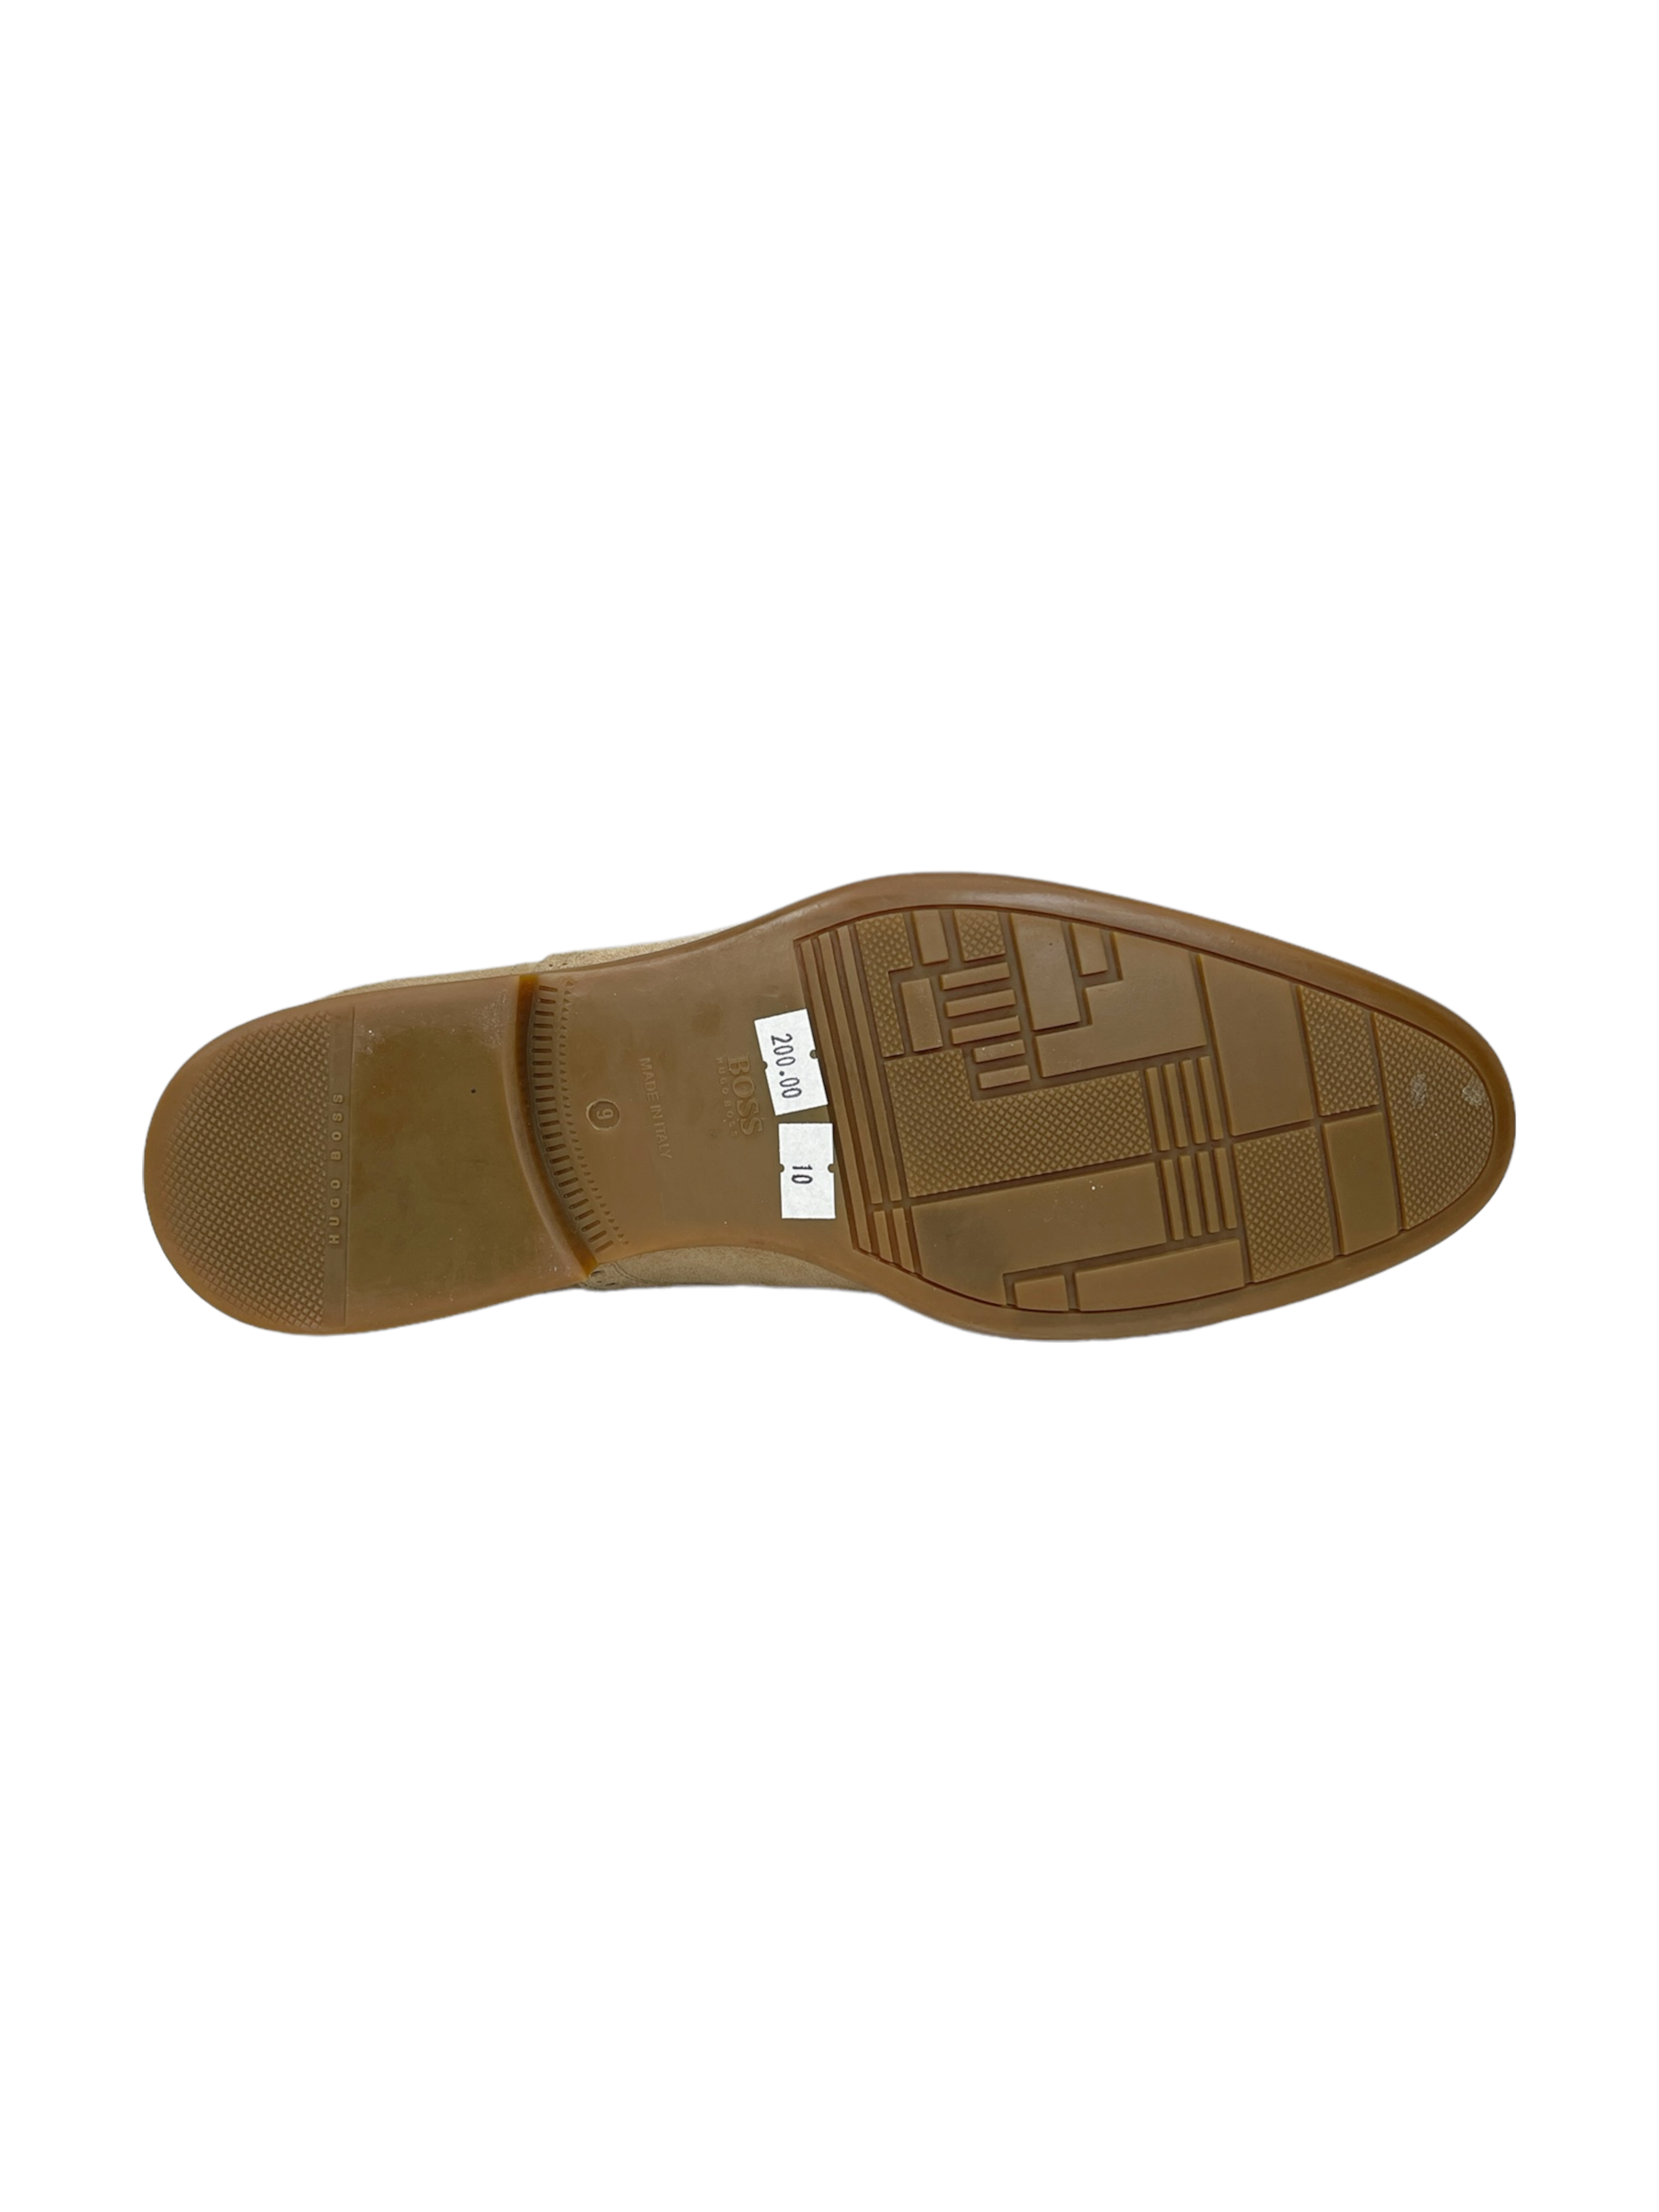 Hugo Boss Light Brown Suede Dress Shoe - Genuine Design Luxury Consignment Calgary, Alberta, Canada New and Pre-Owned Clothing, Shoes, Accessories.